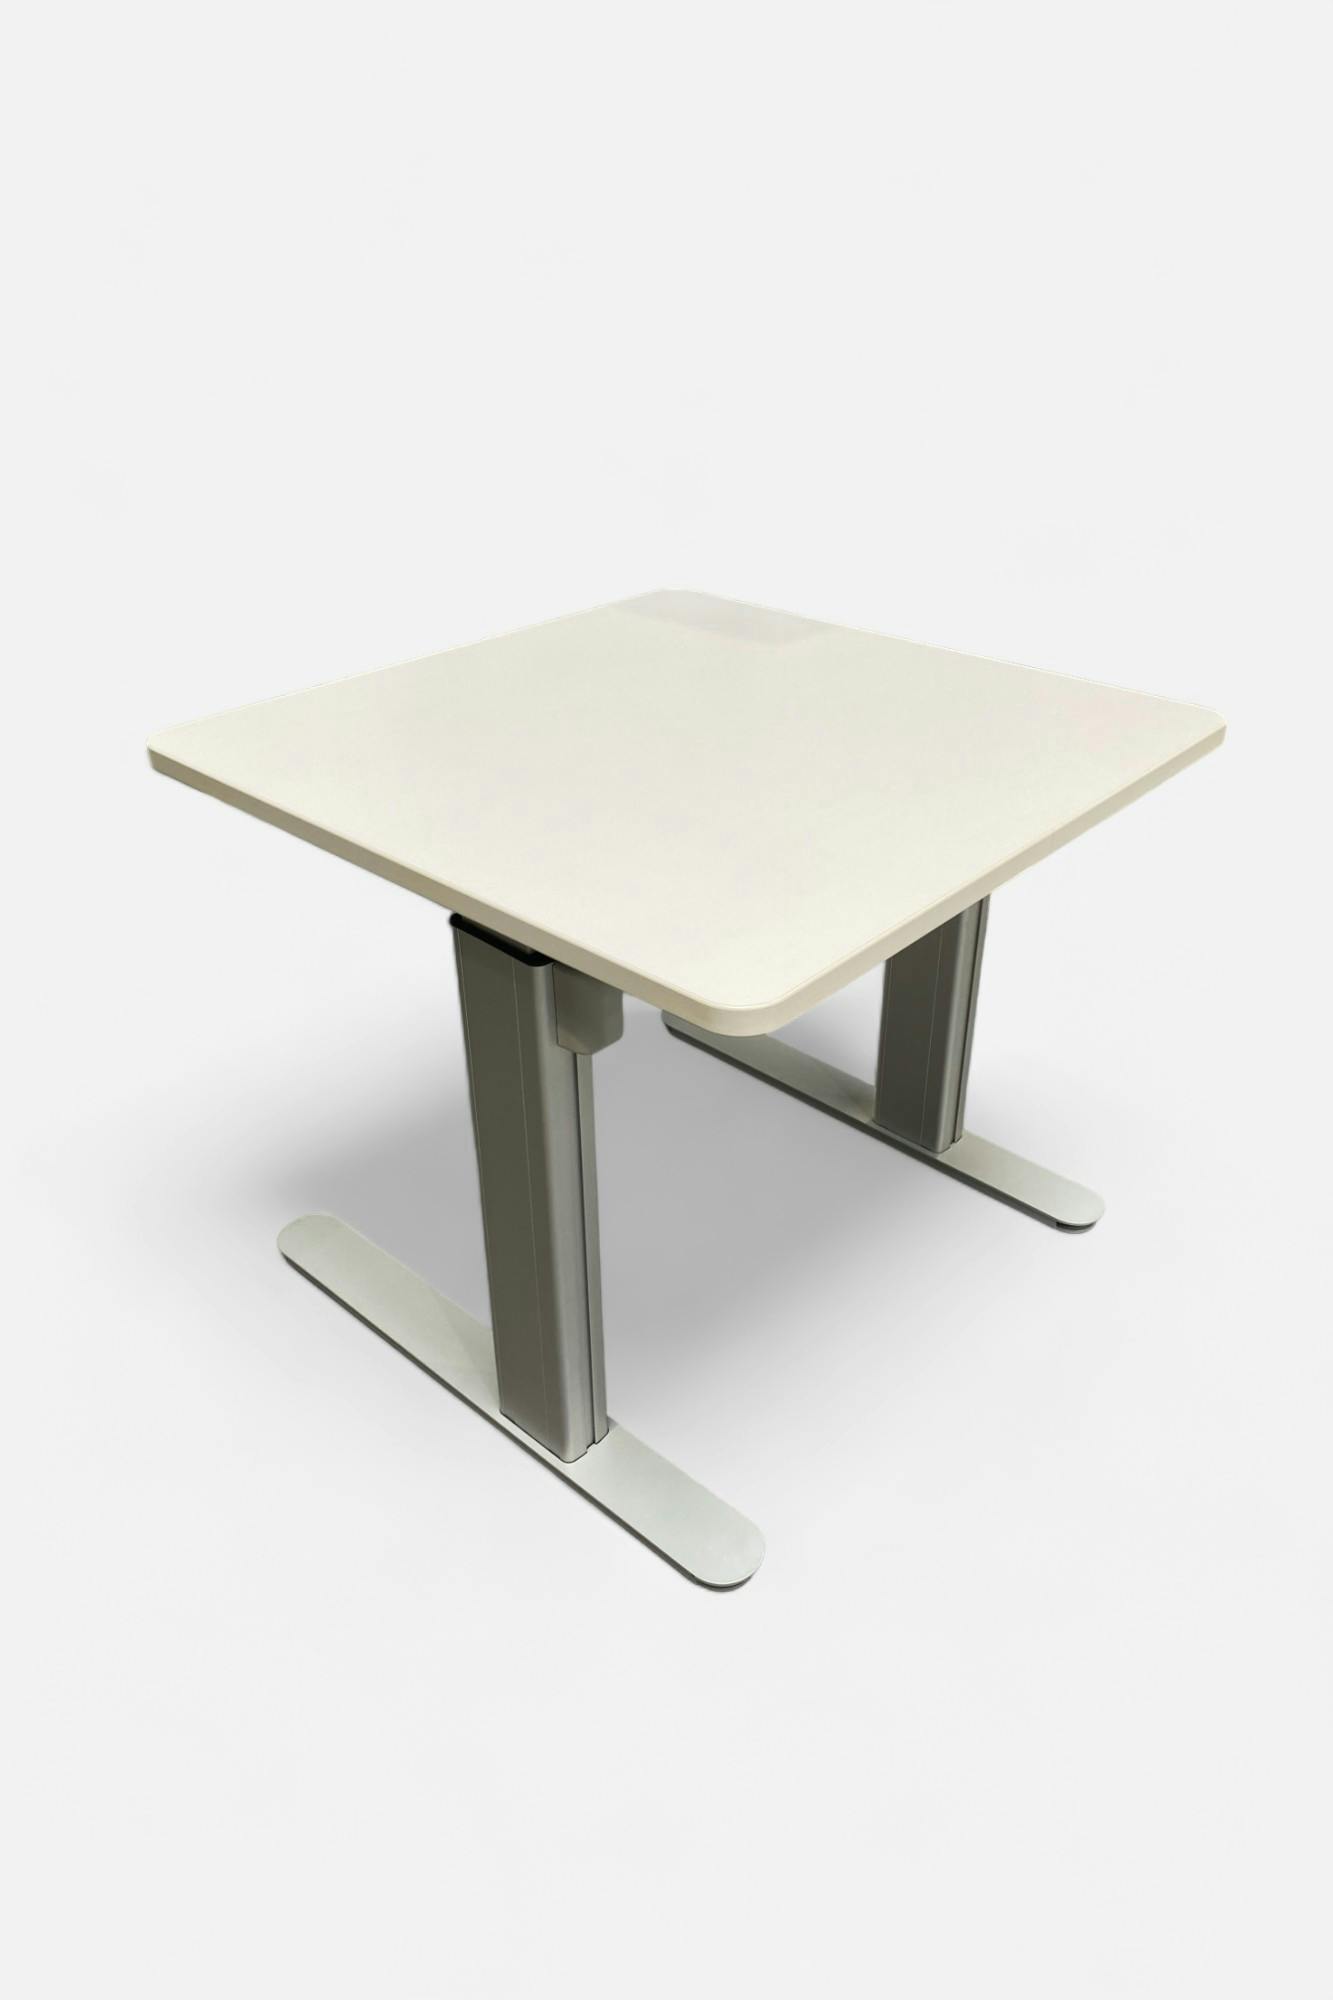 Gumpo 80x80 white table with T metal legs - Relieve Furniture